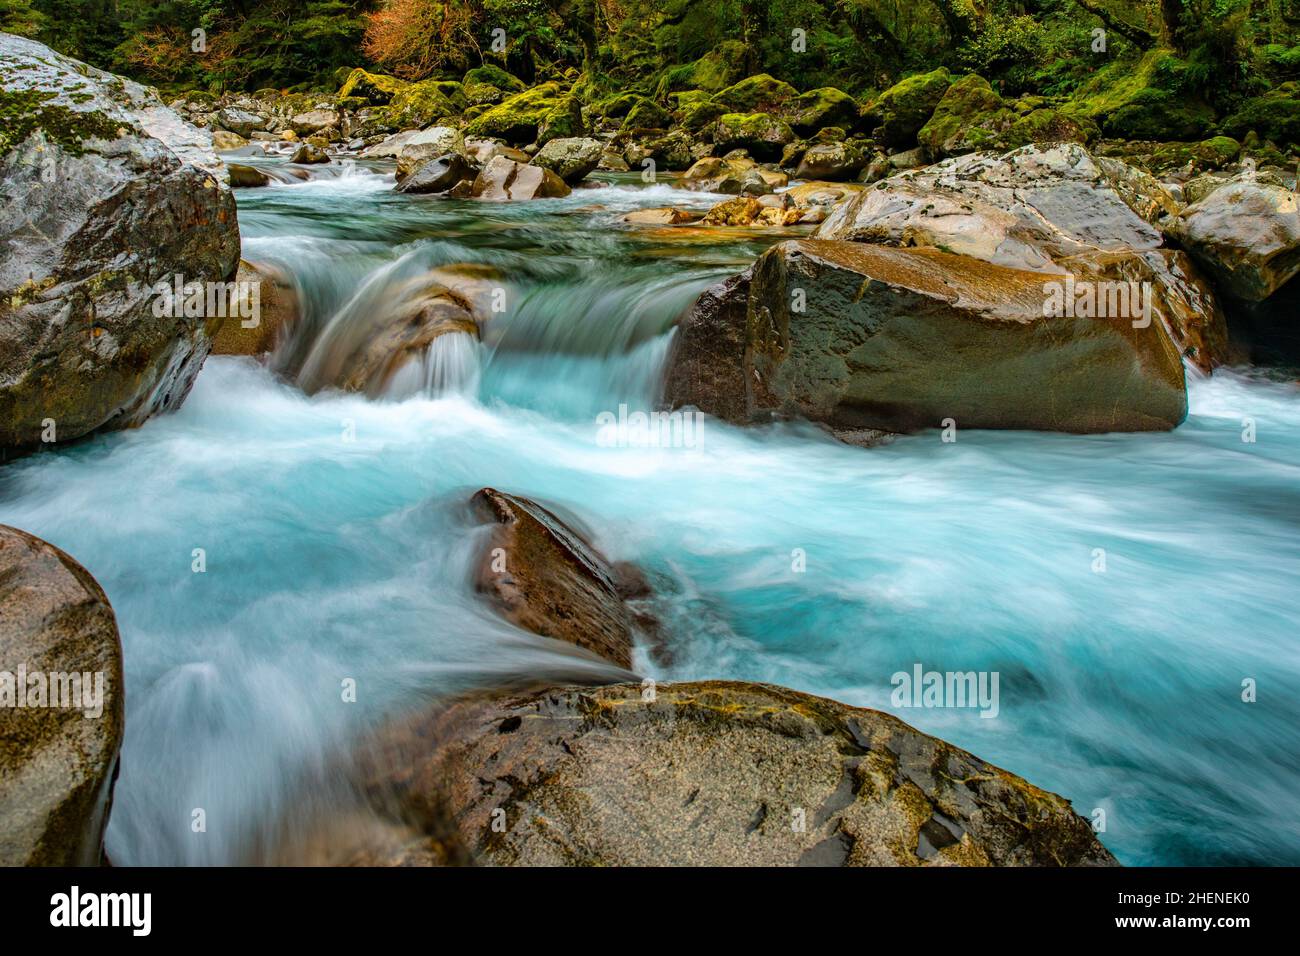 The dreamy long exposure of the river rushing through the rocks in the river in the forest Stock Photo